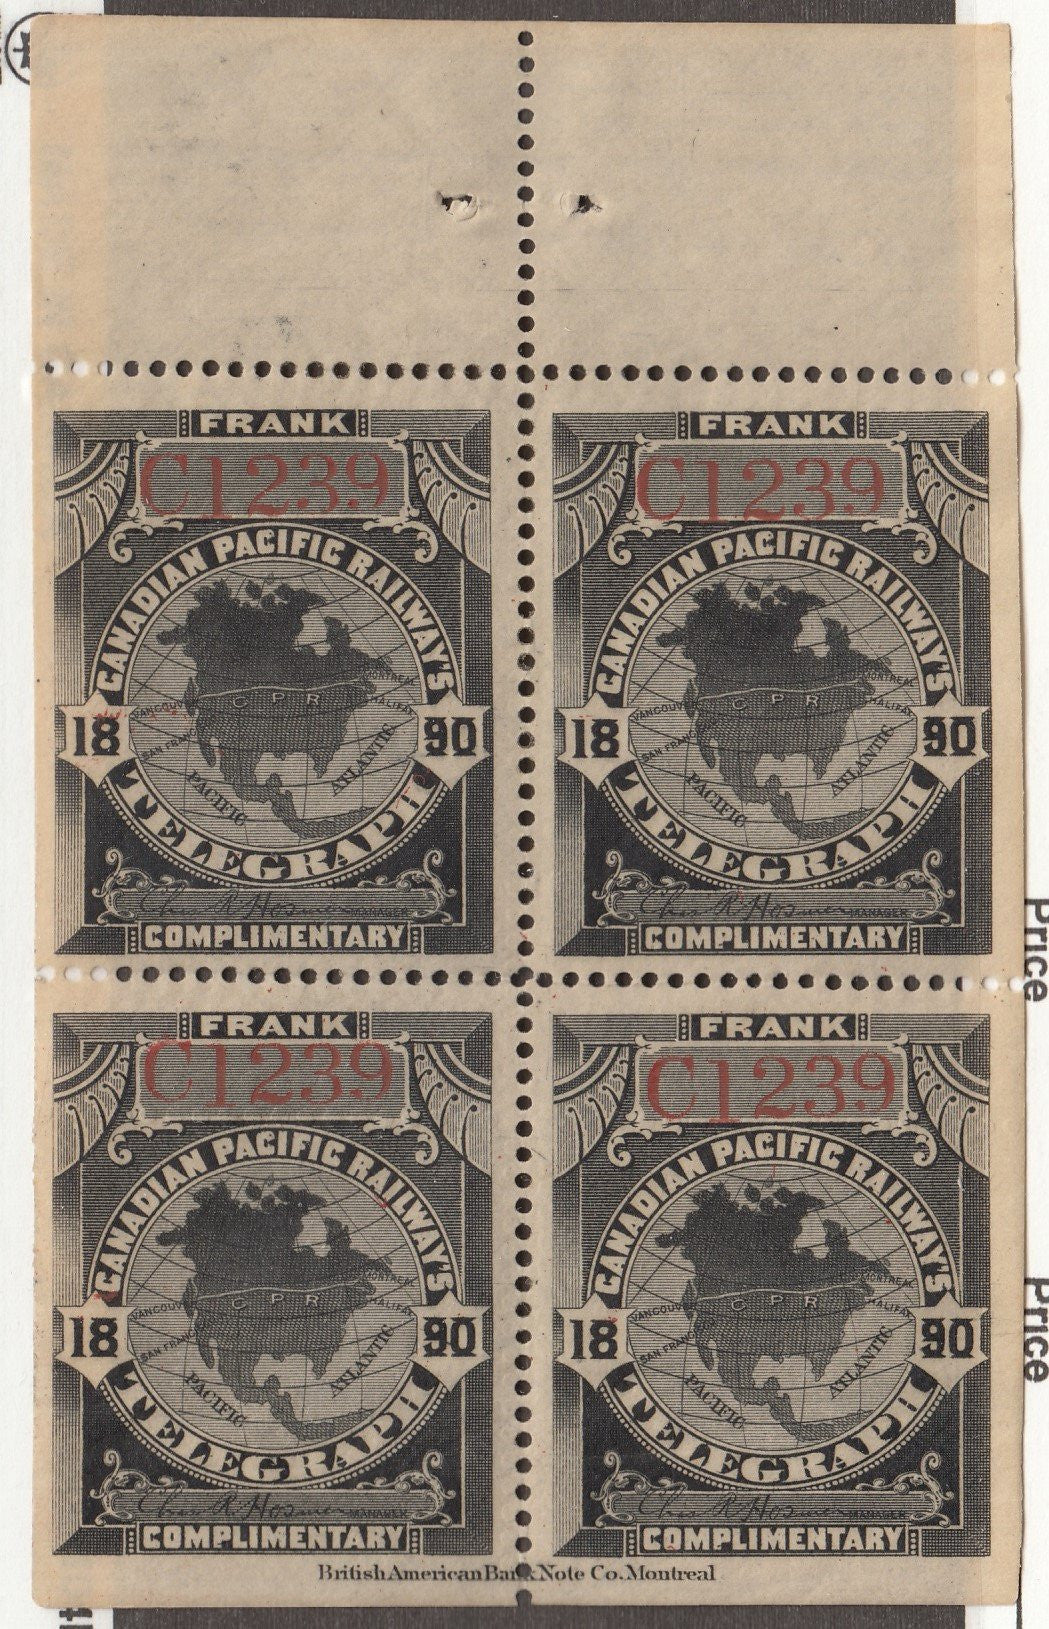 0003TE1707 - TCP 3 - Mint Booklet Pane - Deveney Stamps Ltd. Canadian Stamps